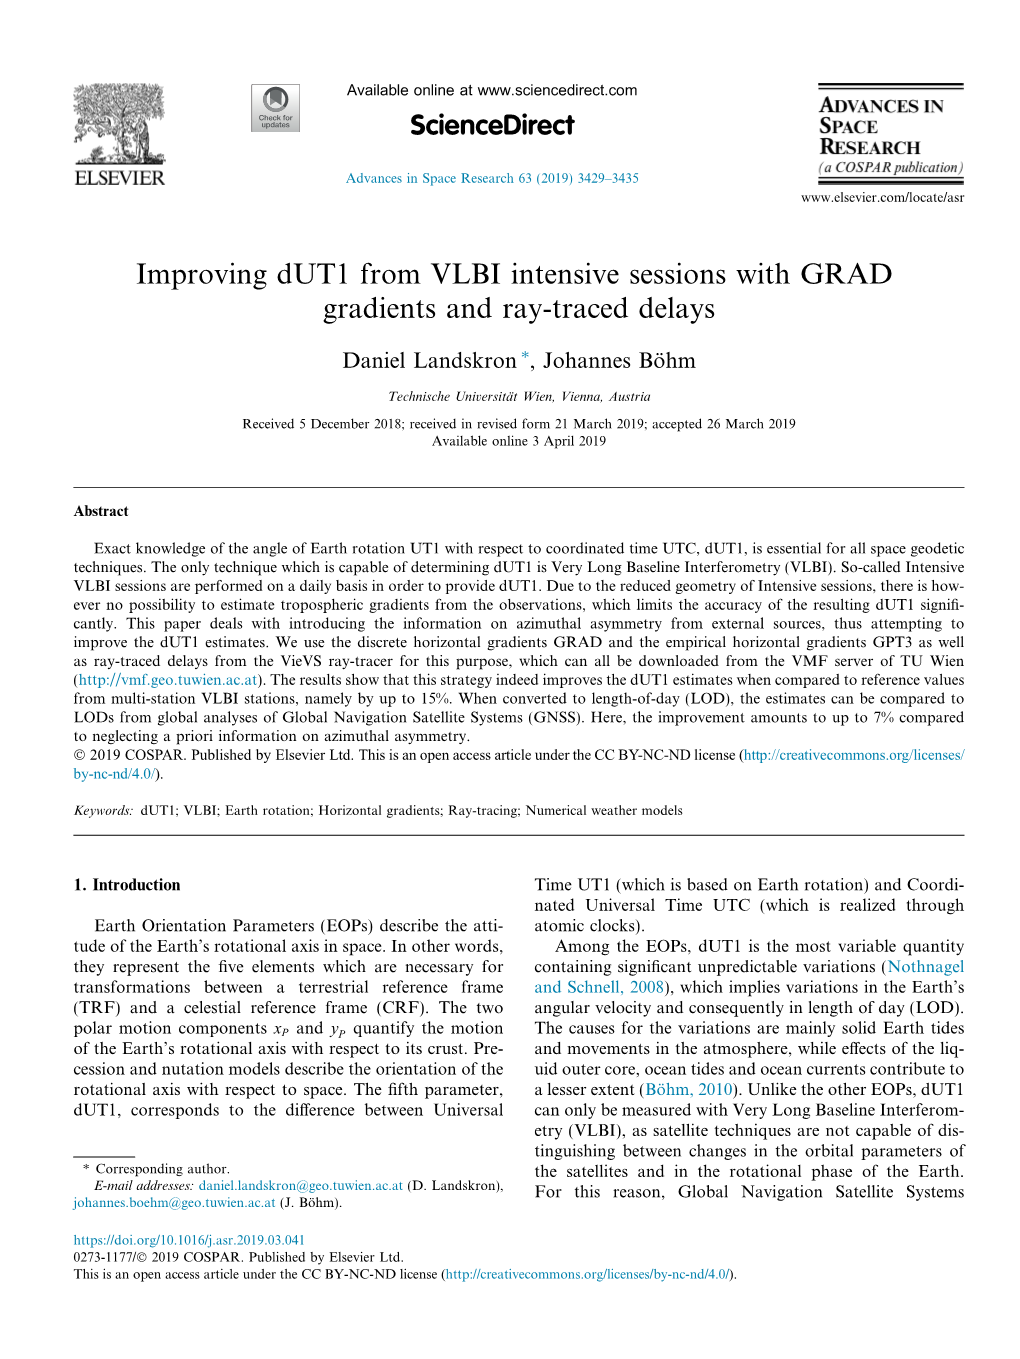 Improving Dut1 from VLBI Intensive Sessions with GRAD Gradients and Ray-Traced Delays